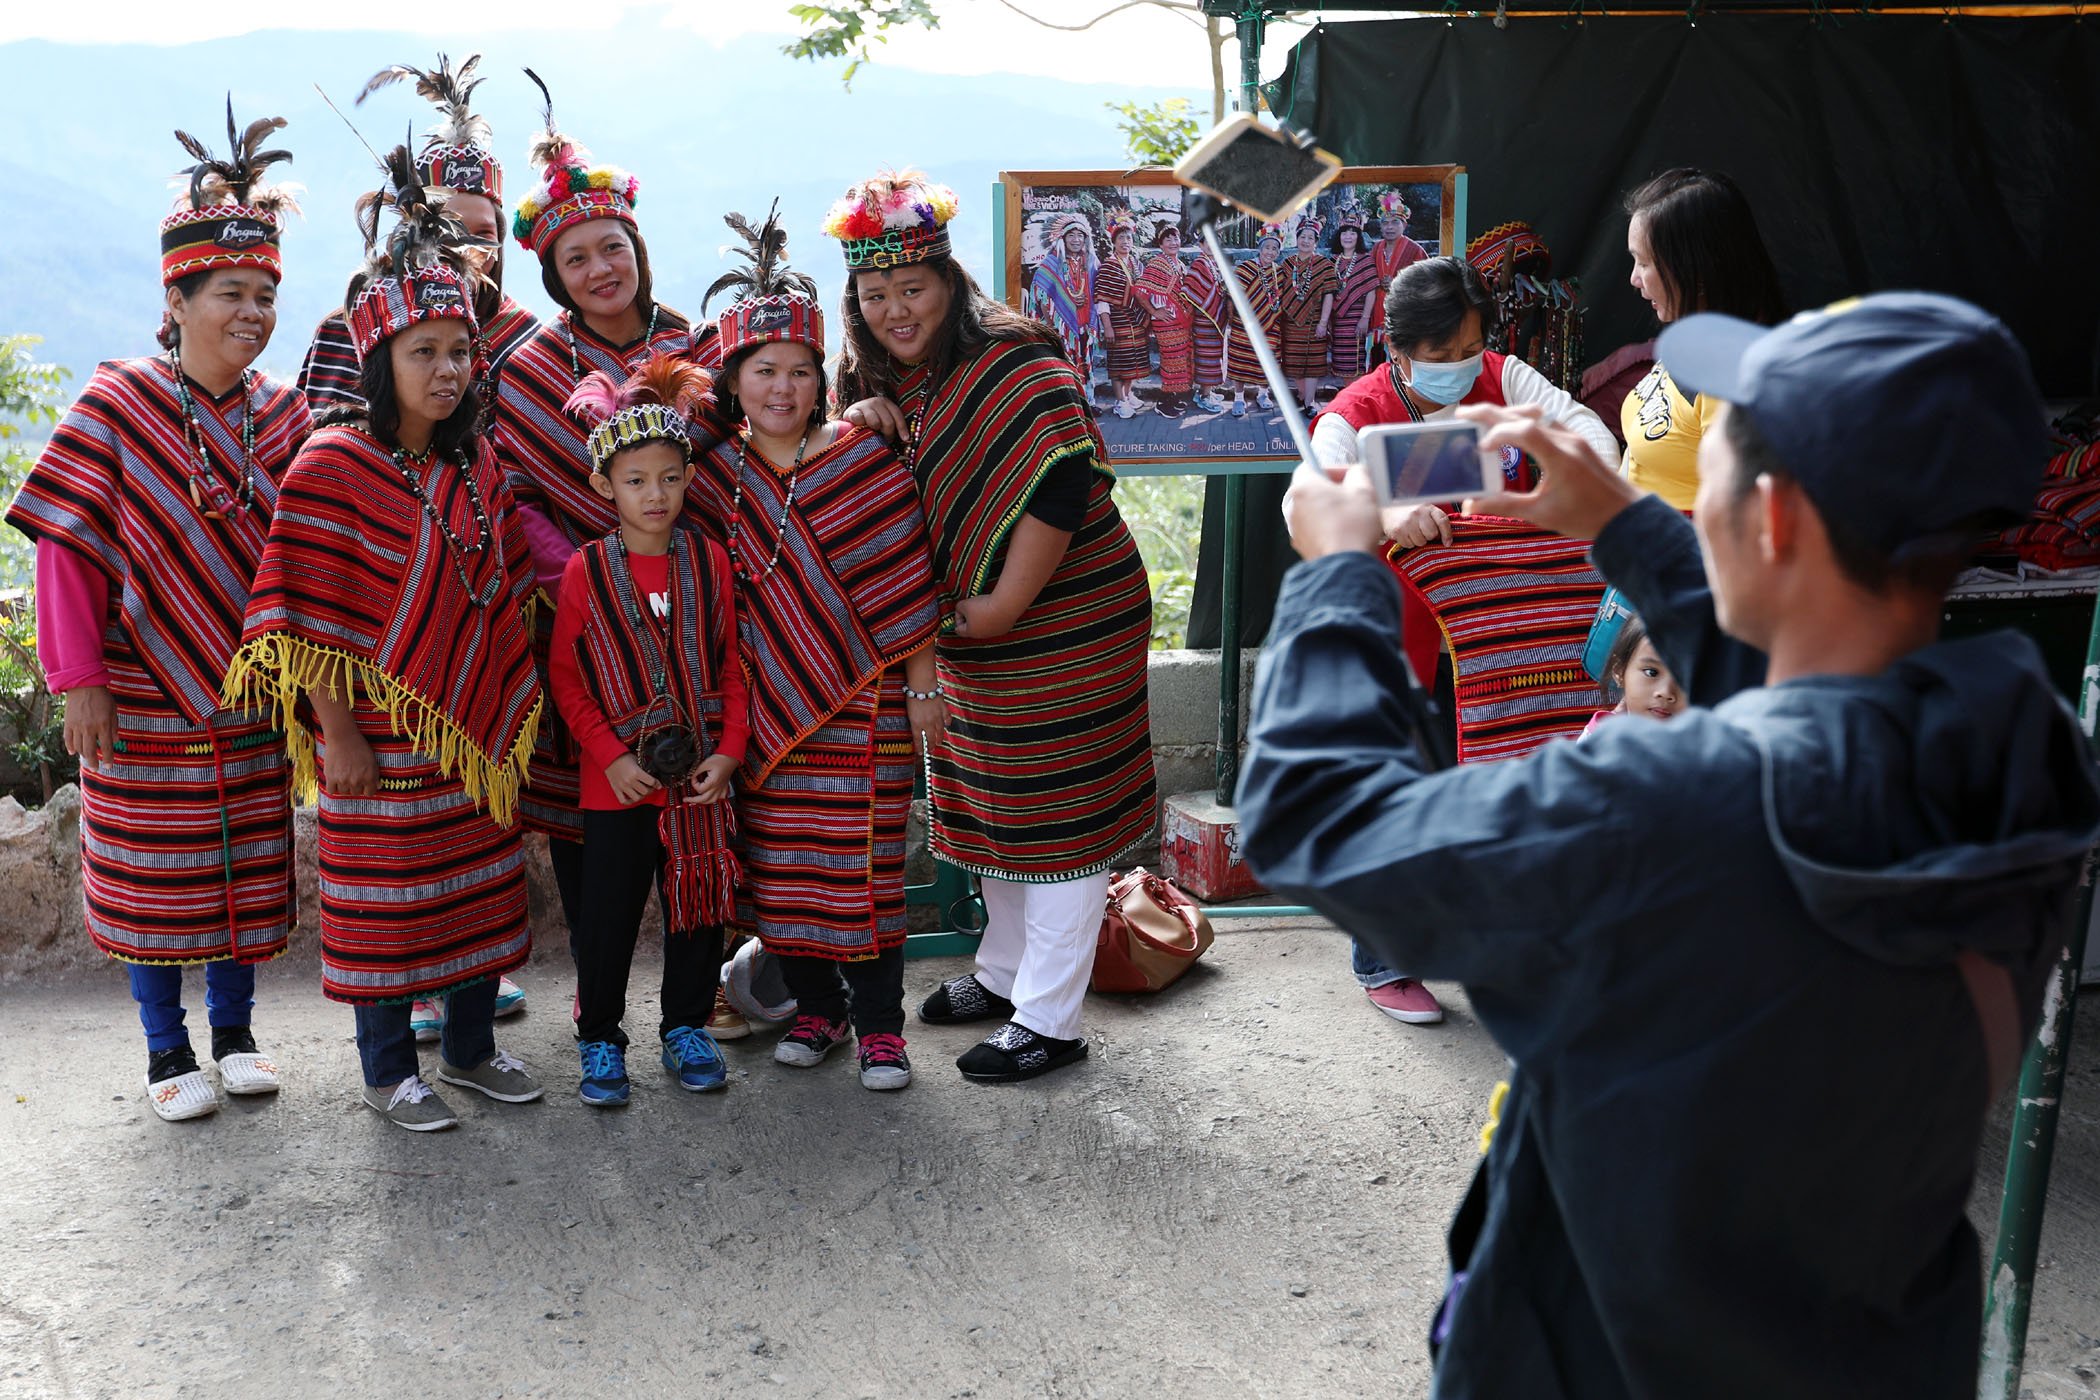 Igorot Costumes At Mines View Park Photos Philippine News Agency